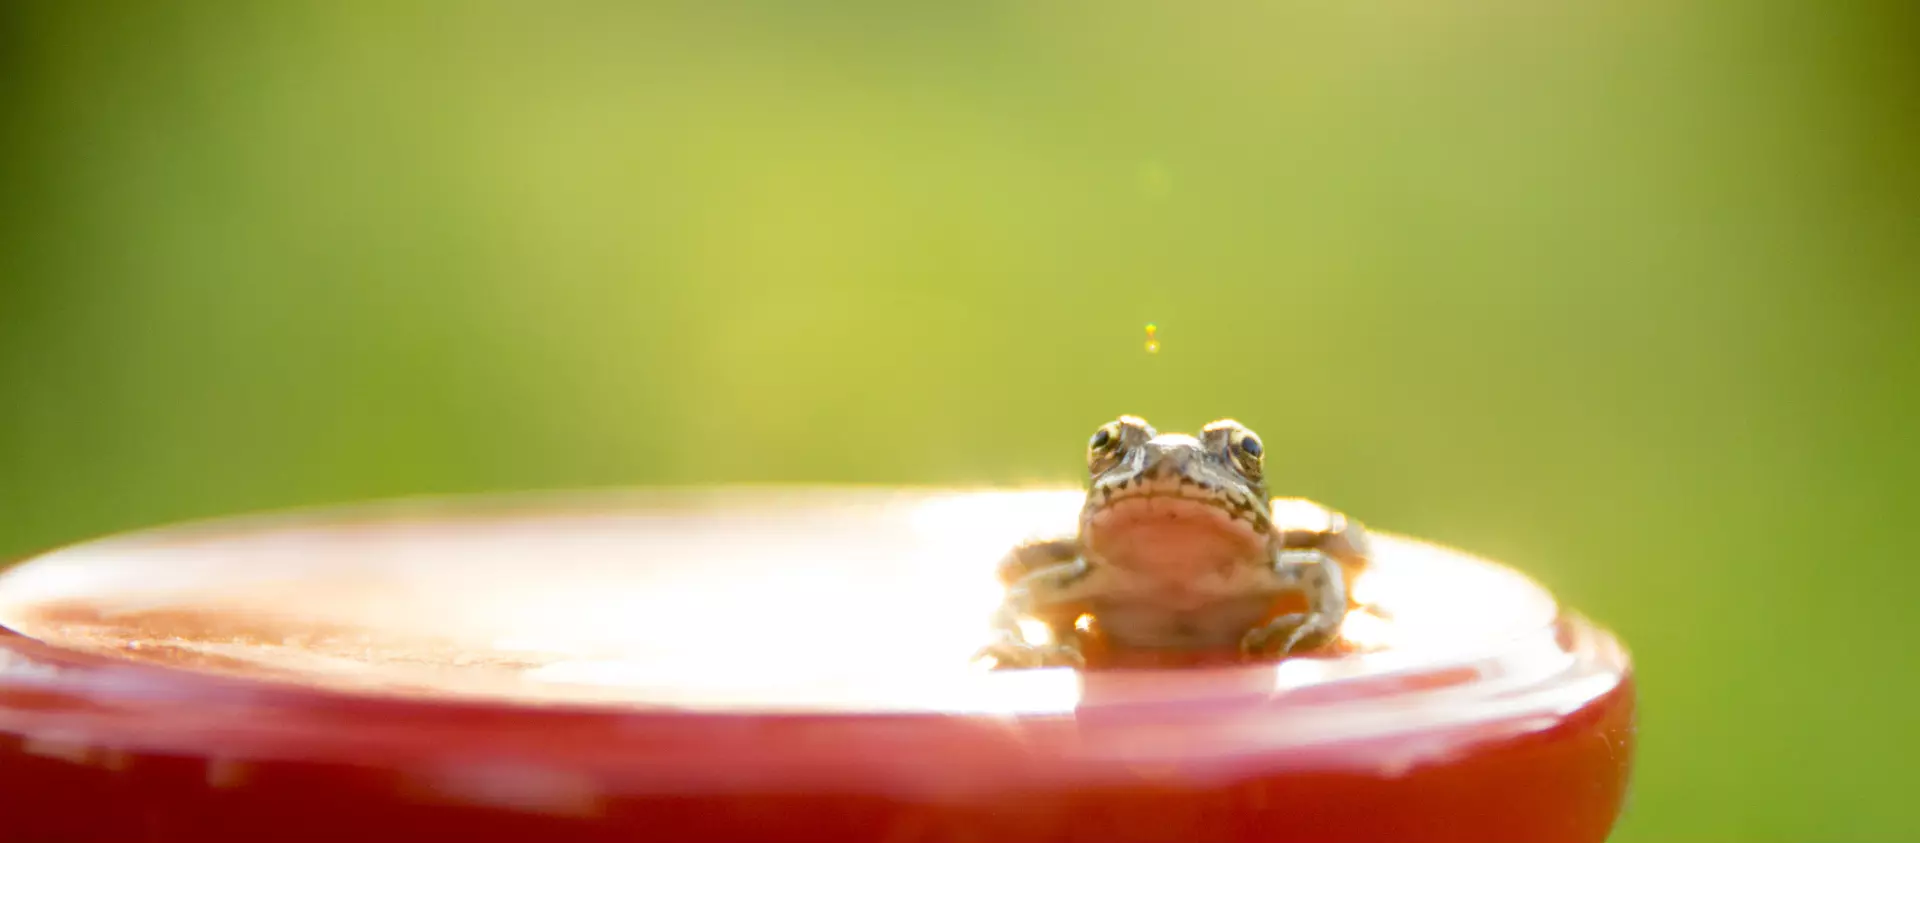 Small green frog resting in a red bird bath, with a blurry green background.